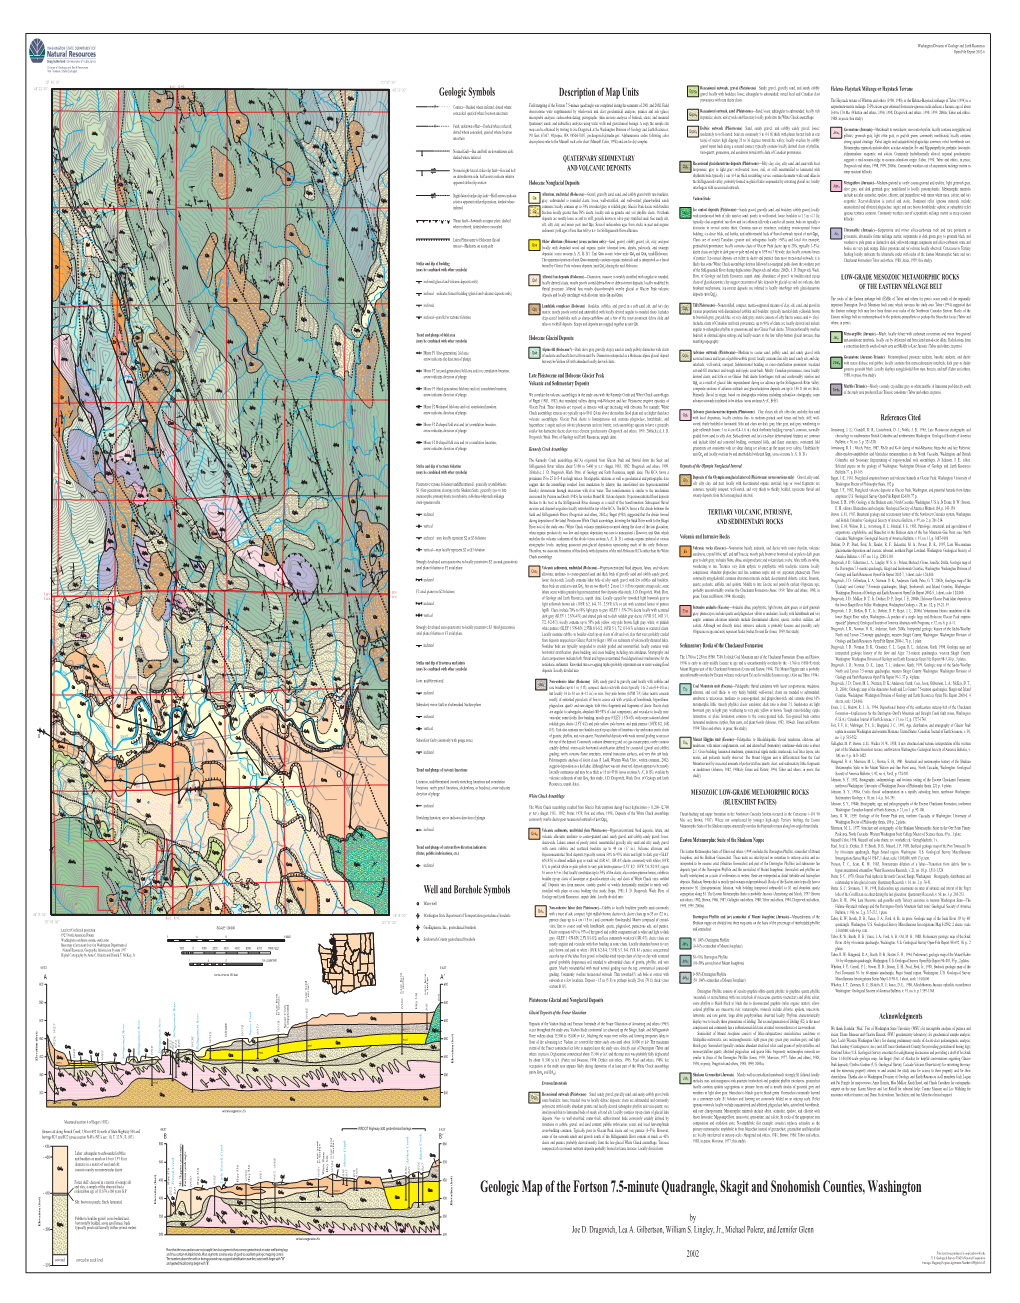 OFR 2002-6, Geologic Map of the Fortson 7.5-Minute